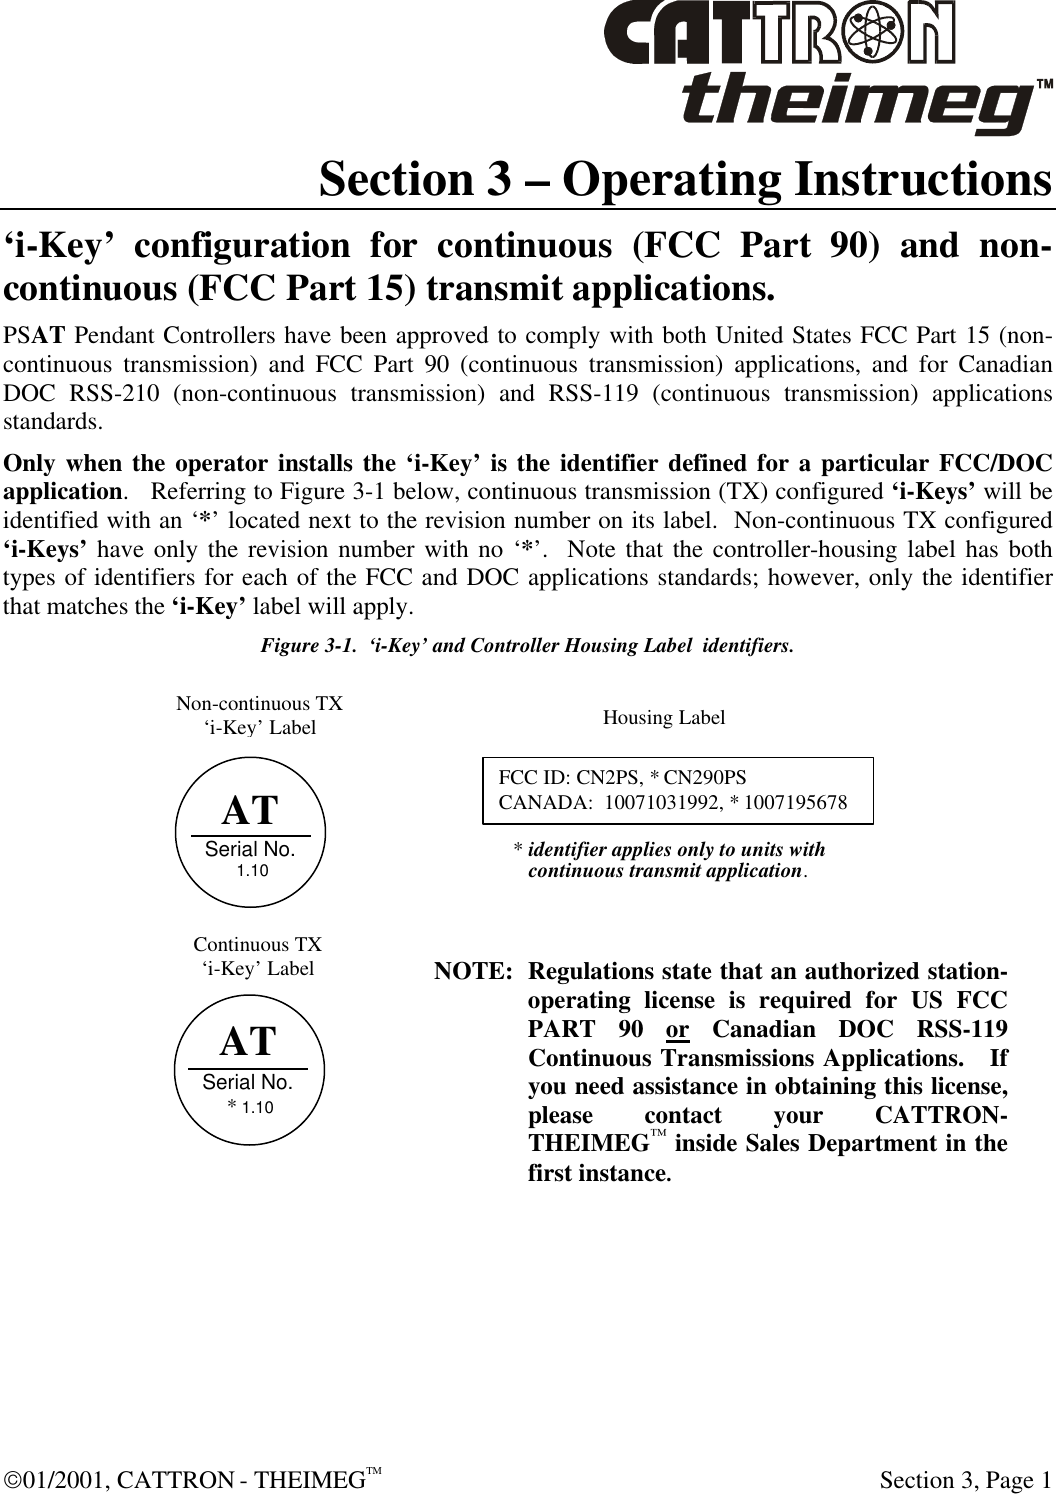  01/2001, CATTRON - THEIMEGTM  Section 3, Page 1 Section 3 – Operating Instructions ‘i-Key’ configuration for continuous (FCC Part 90) and non-continuous (FCC Part 15) transmit applications. PSAT Pendant Controllers have been approved to comply with both United States FCC Part 15 (non-continuous transmission) and FCC Part 90 (continuous transmission) applications, and for Canadian DOC RSS-210 (non-continuous transmission) and RSS-119 (continuous transmission) applications standards.  Only when the operator installs the ‘i-Key’ is the identifier defined for a particular FCC/DOC application.   Referring to Figure 3-1 below, continuous transmission (TX) configured ‘i-Keys’ will be identified with an ‘*’ located next to the revision number on its label.  Non-continuous TX configured ‘i-Keys’ have only the revision number with no ‘*’.  Note that the controller-housing label has both types of identifiers for each of the FCC and DOC applications standards; however, only the identifier that matches the ‘i-Key’ label will apply.    Figure 3-1.  ‘i-Key’ and Controller Housing Label  identifiers.             NOTE: Regulations state that an authorized station-operating license is required for US FCC PART 90 or Canadian DOC RSS-119 Continuous Transmissions Applications.   If you need assistance in obtaining this license, please contact your CATTRON-THEIMEG™ inside Sales Department in the first instance. AT Serial No.  1.10     FCC ID: CN2PS, * CN290PS CANADA:  10071031992, * 1007195678 Housing Label Non-continuous TX ‘i-Key’ Label Continuous TX ‘i-Key’ Label * identifier applies only to units with    continuous transmit application.    AT Serial No.  * 1.10     